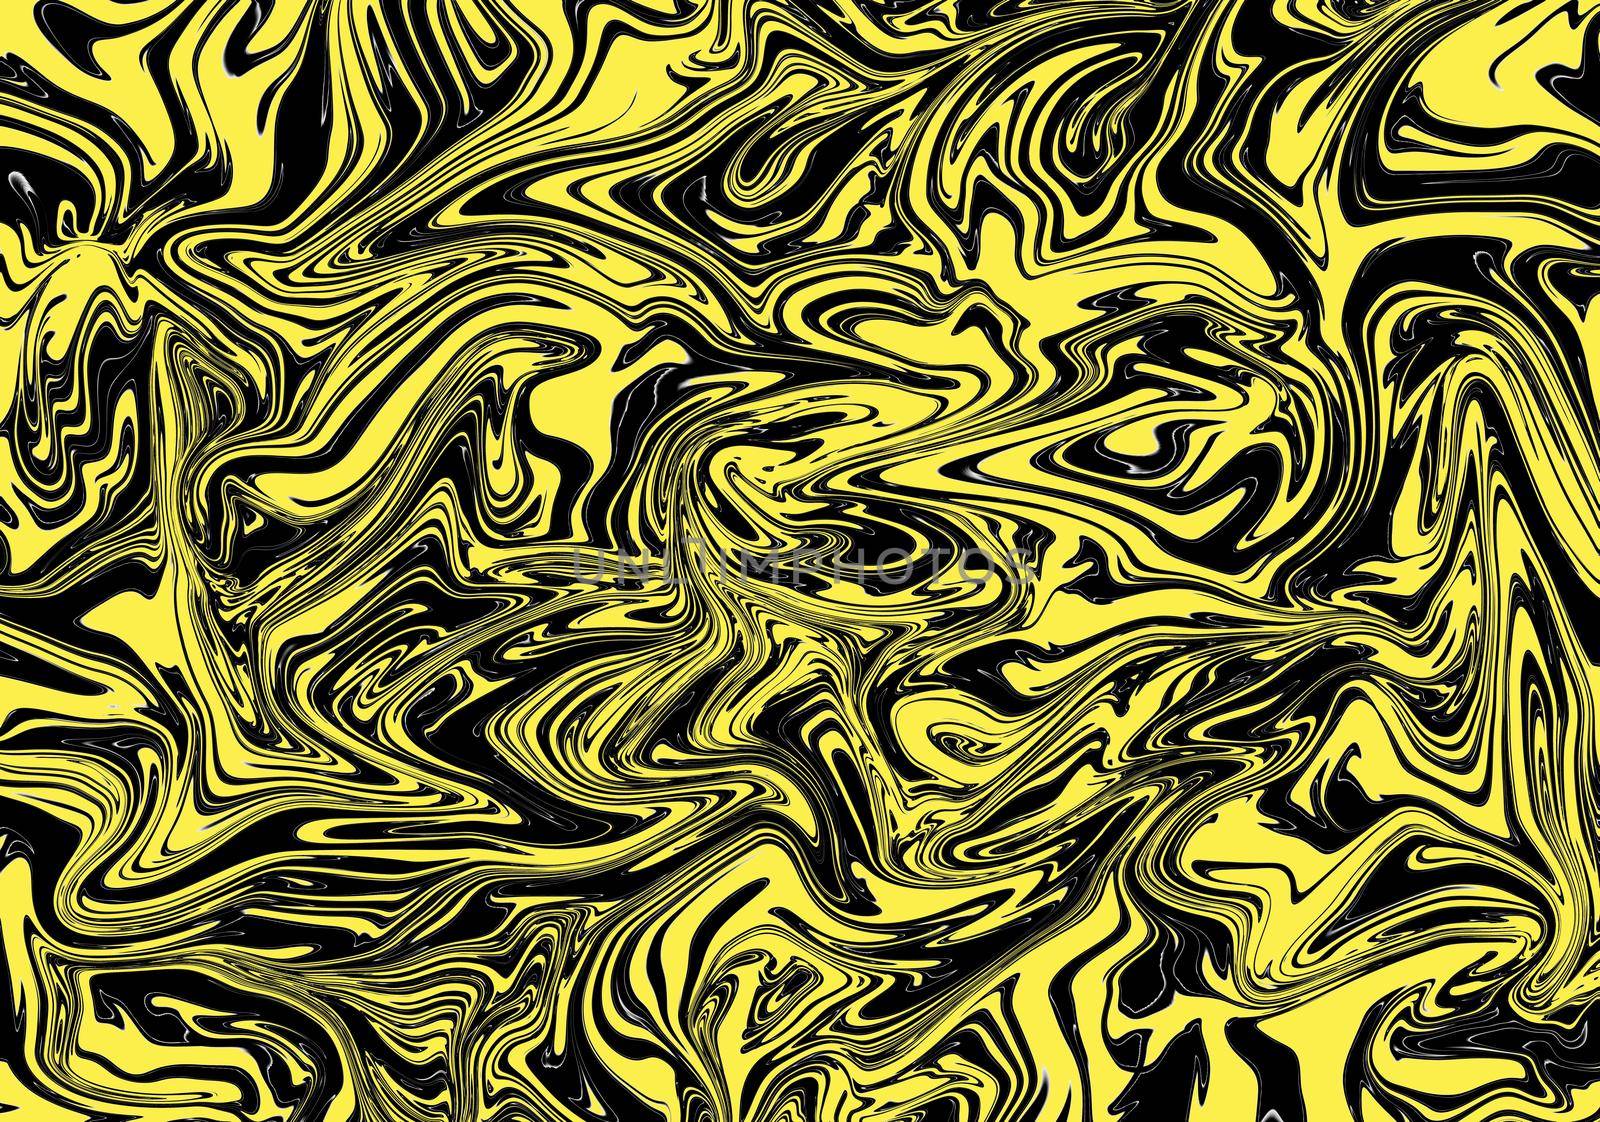 Black and yellow marble effext by Russell102